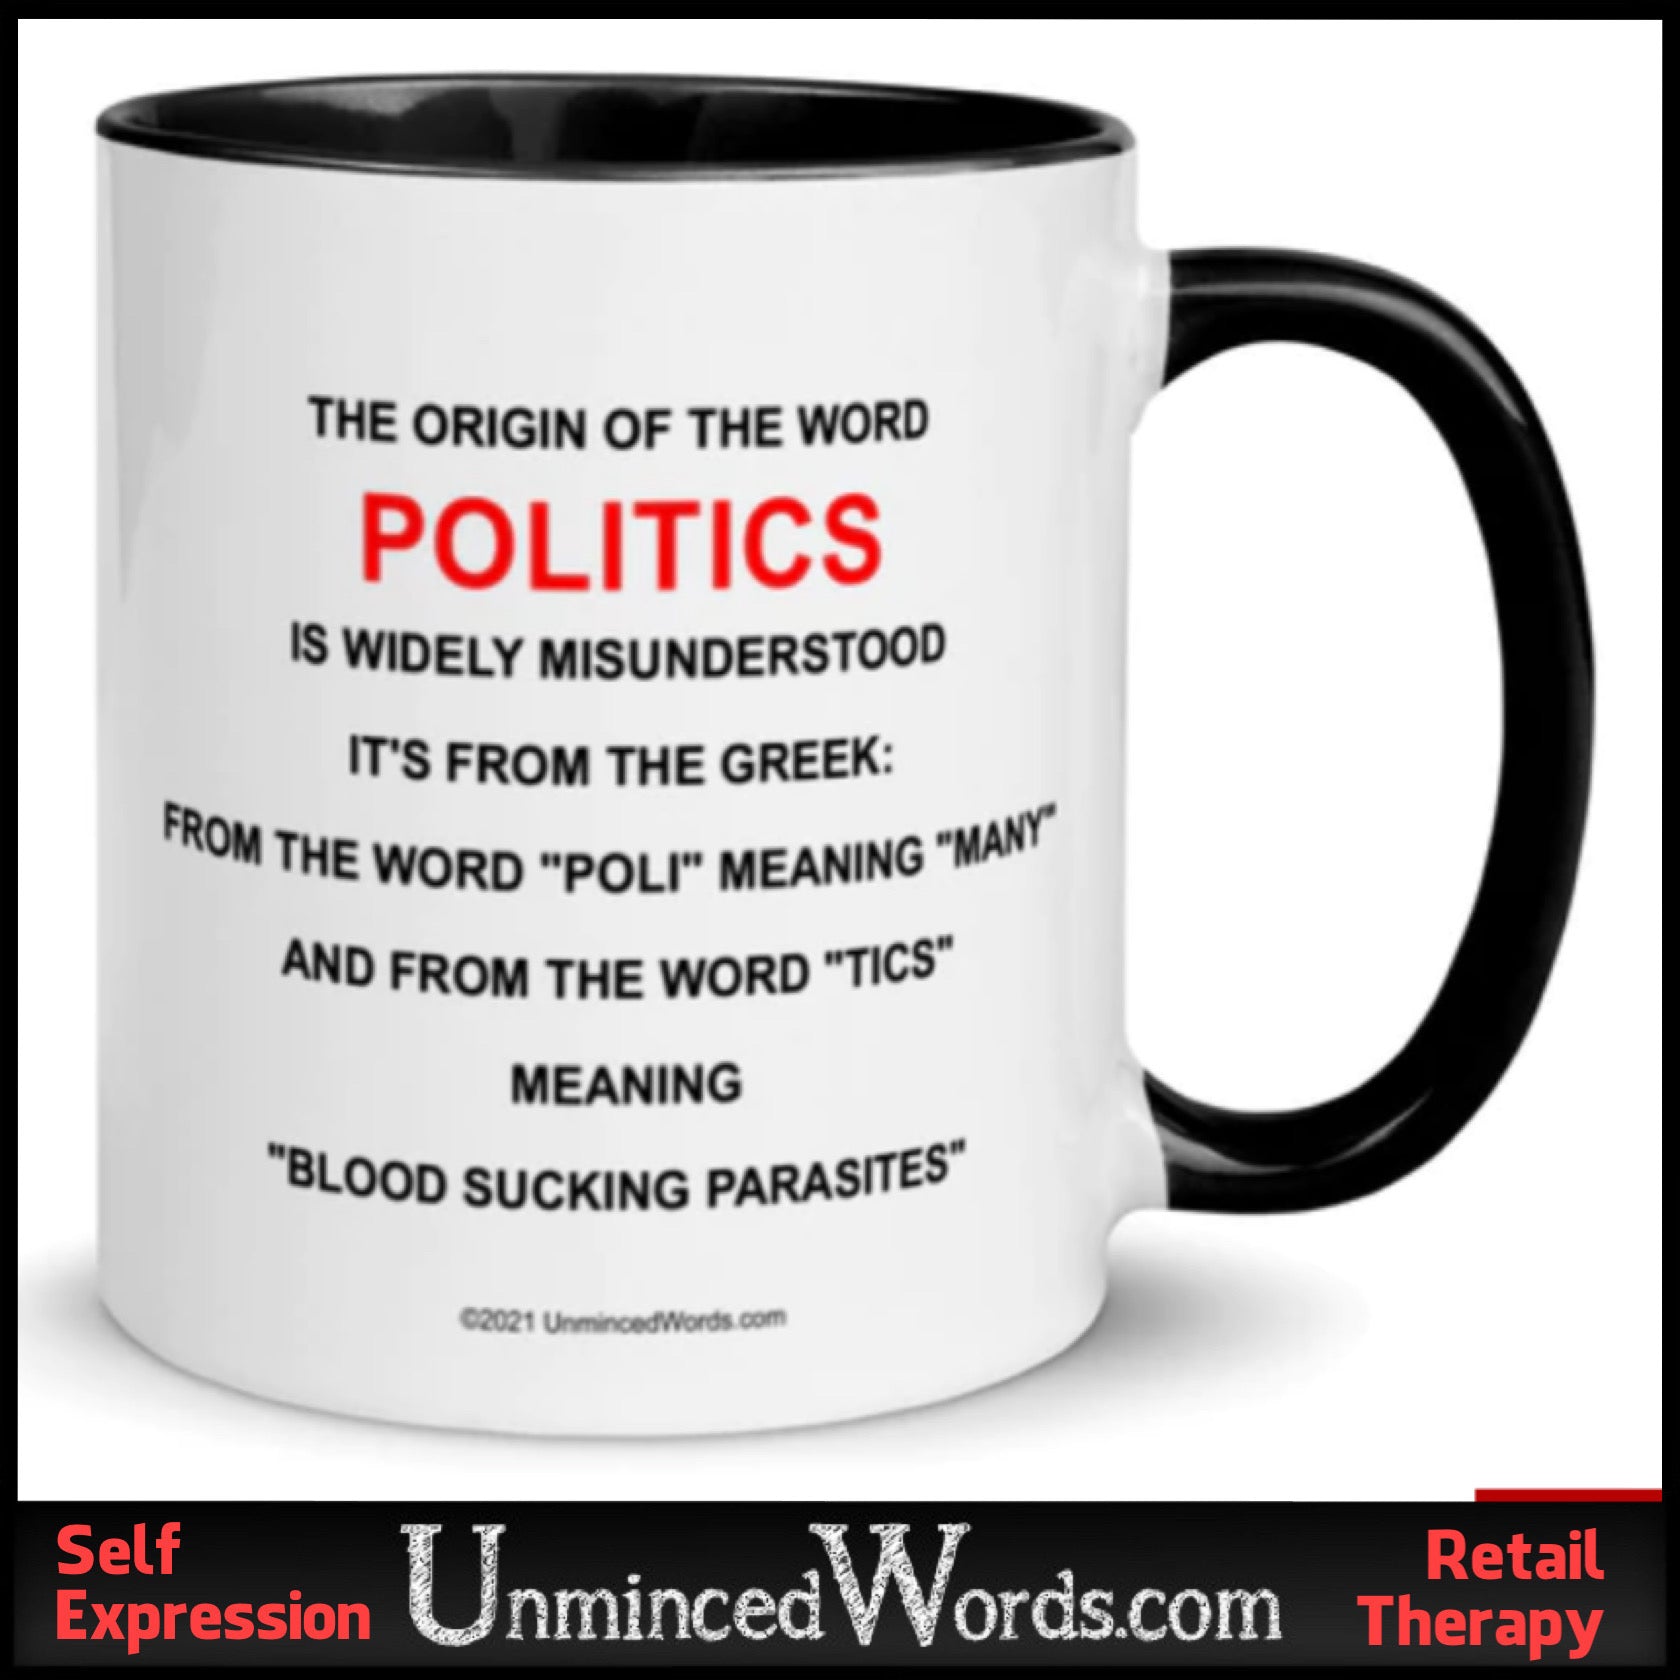 Our DEFINITION OF POLITICS COLLECTION is unfiltered truth.